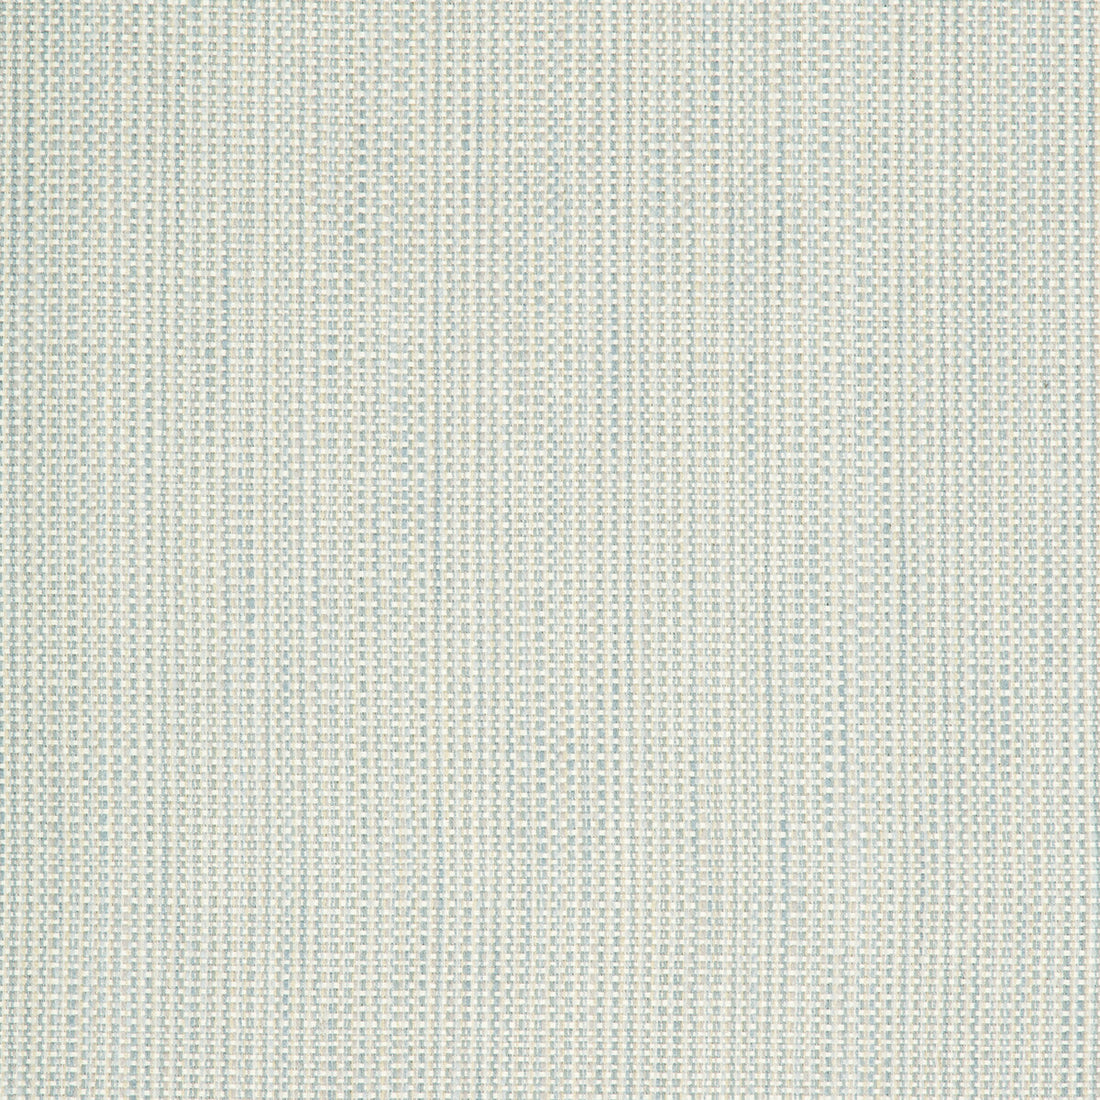 Kravet Smart fabric in 34627-1511 color - pattern 34627.1511.0 - by Kravet Smart in the Performance Crypton Home collection